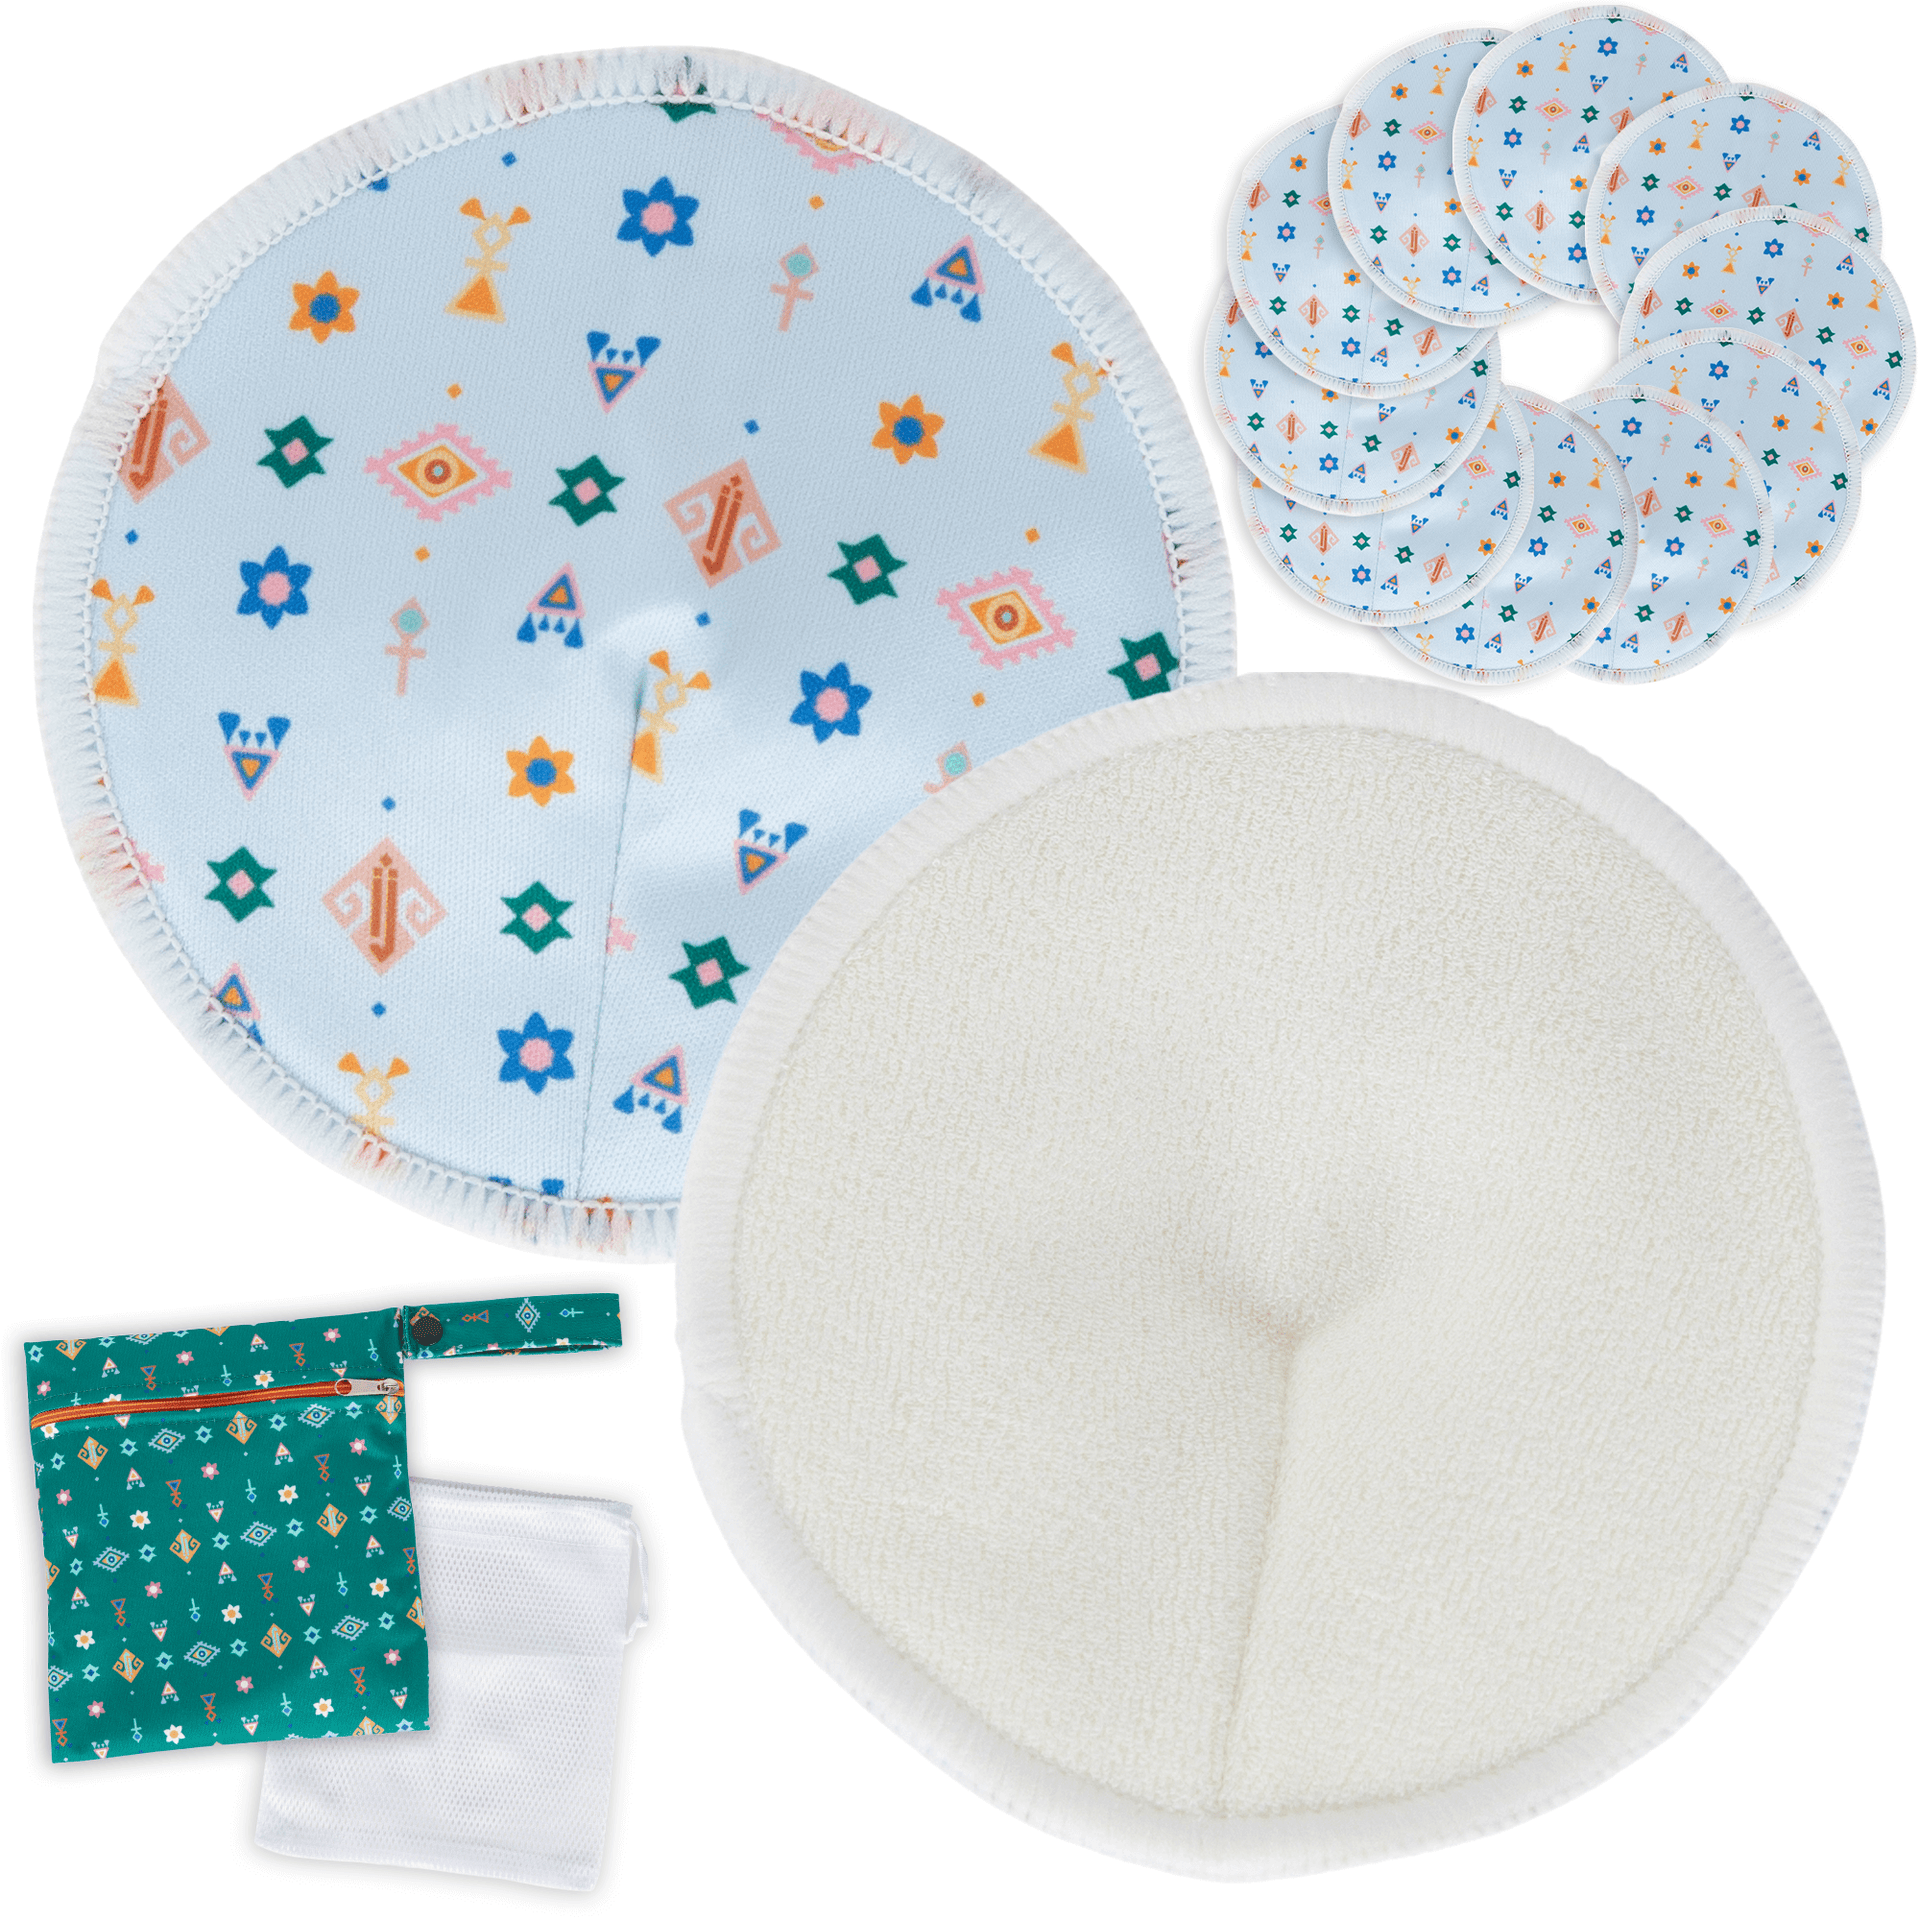 Best Breast Pads On The Internet